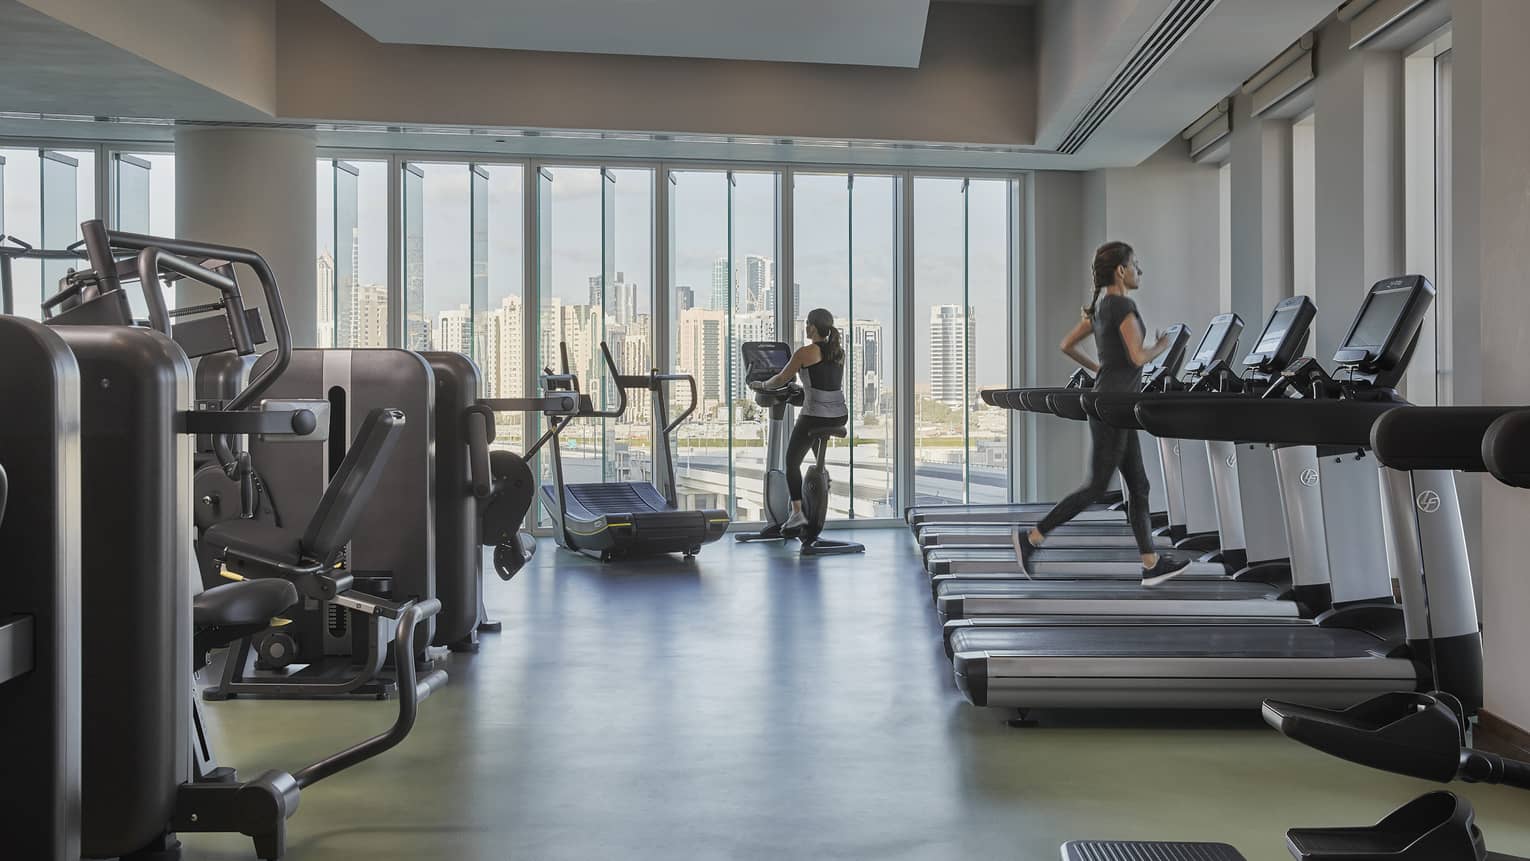 Two women working out on a treadmill and an eliptical in a large grey gym overlooking the Abu Dhabi skyline.